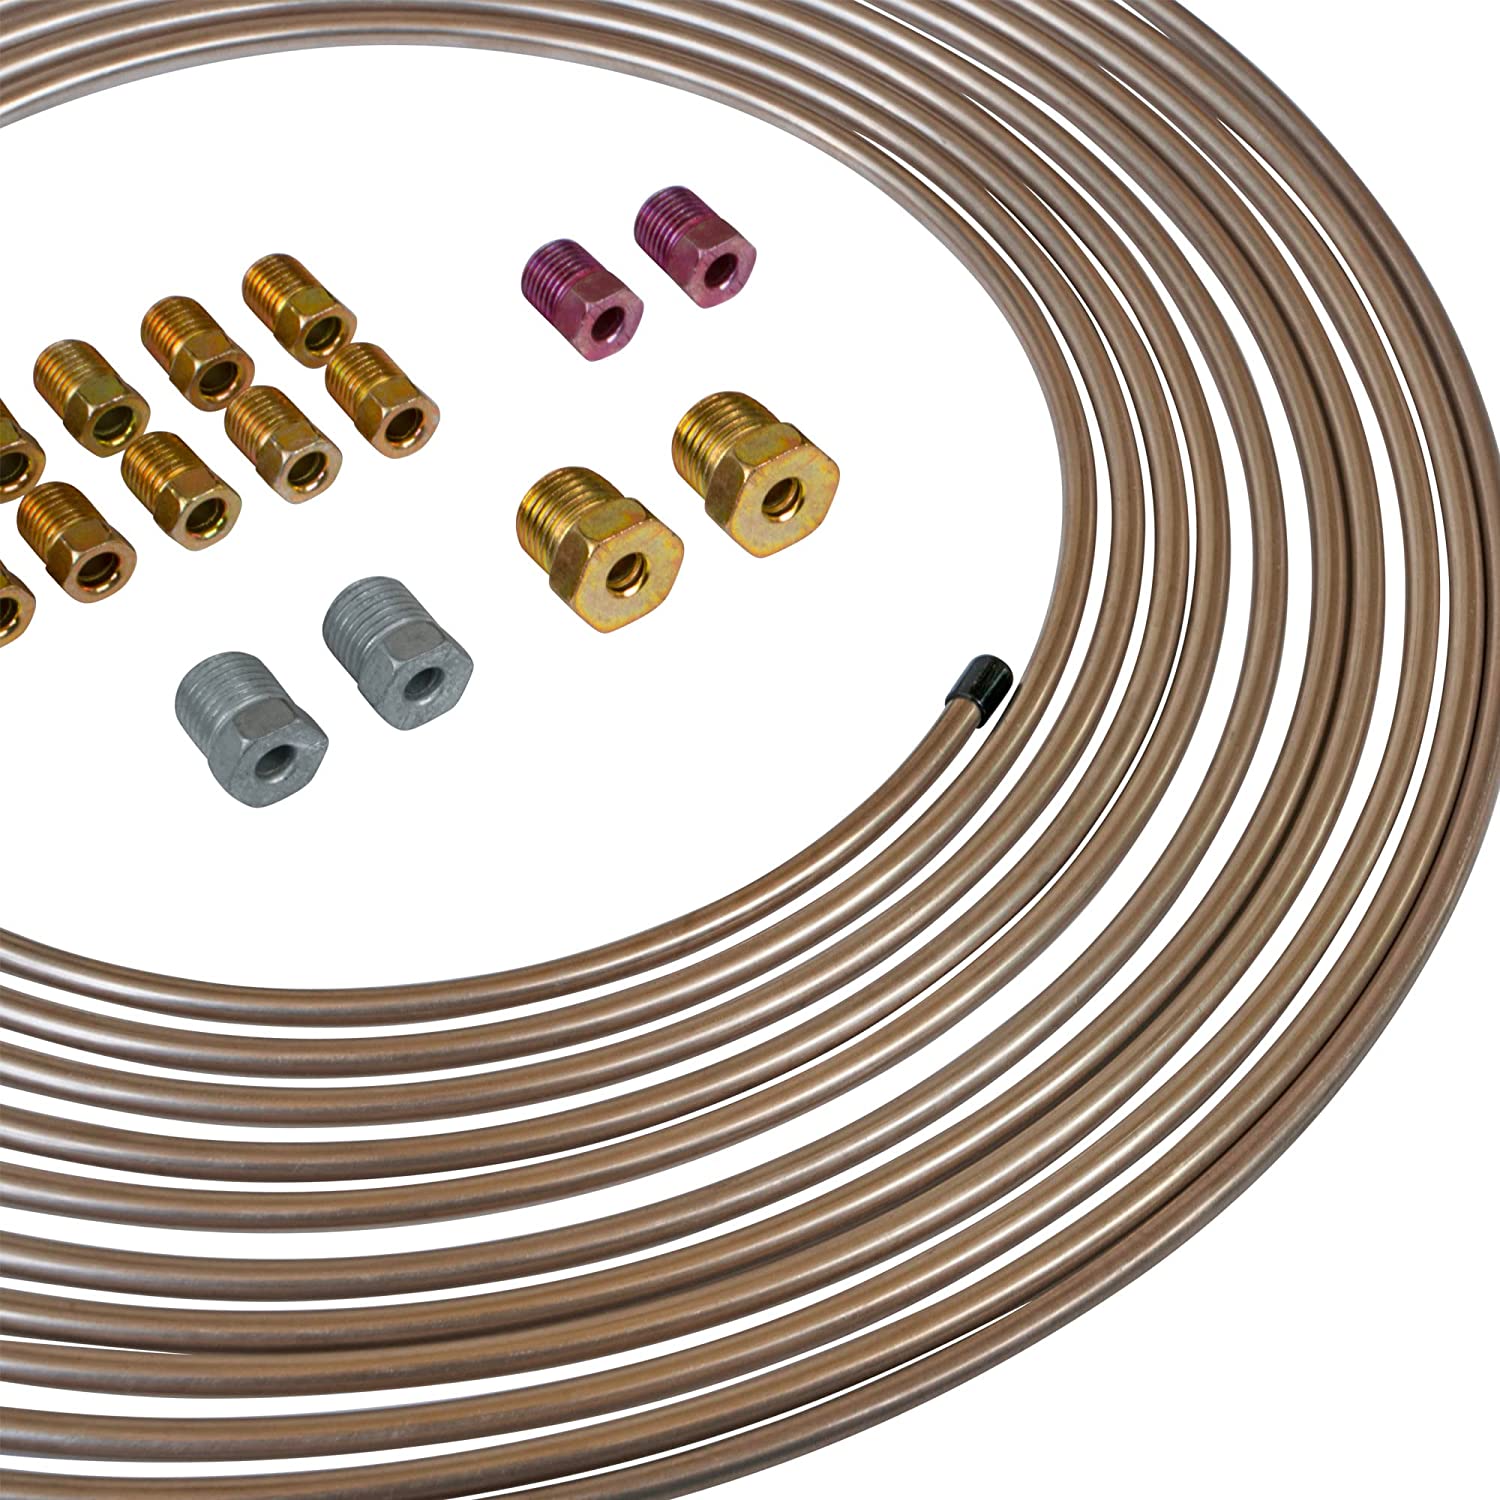 Copper Nickel Brake Line Tubing Coil and Fitting